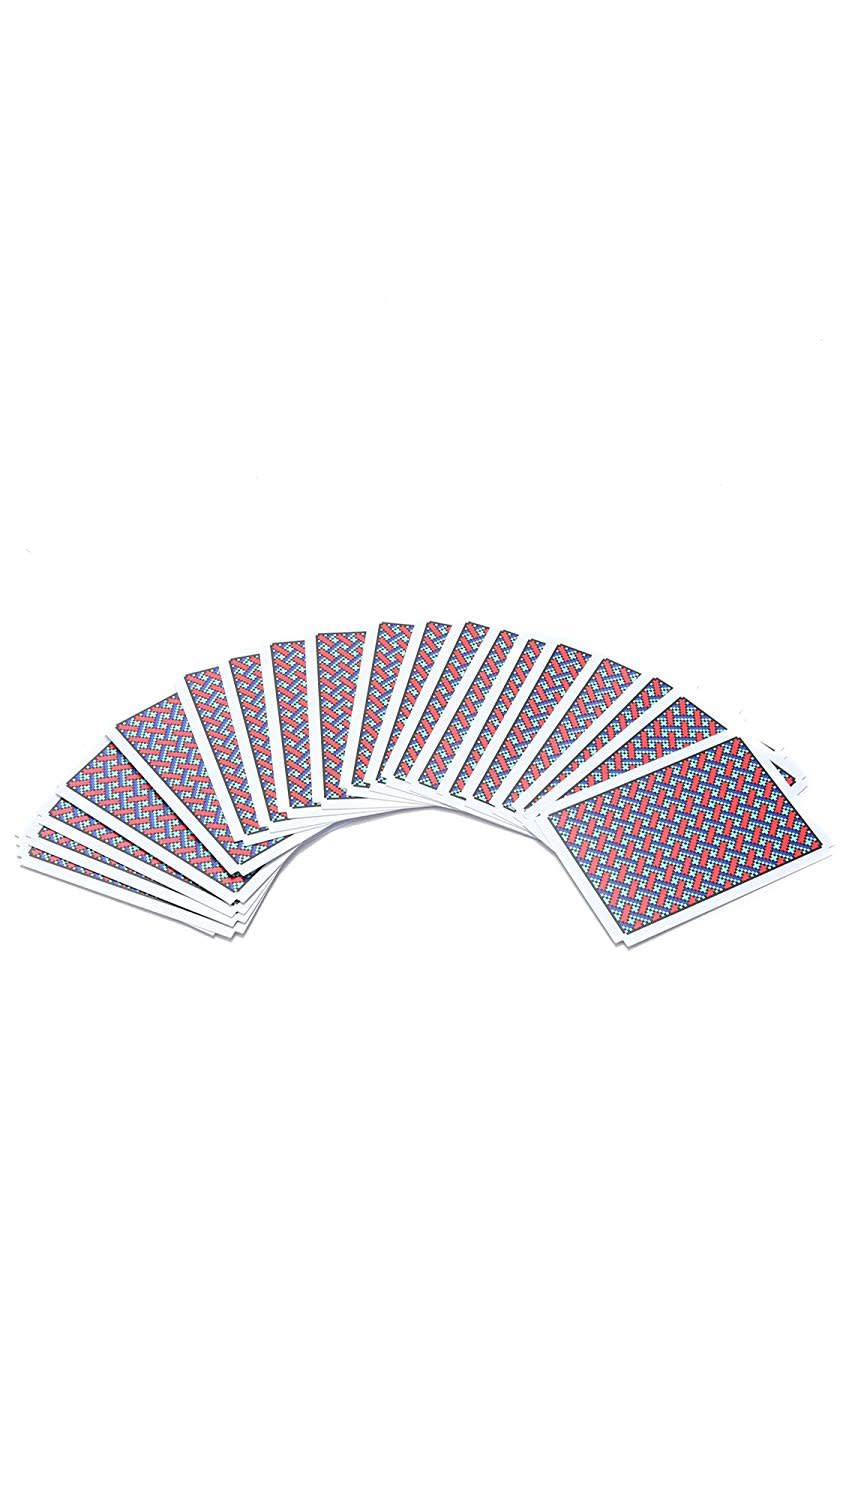 Best Gift for Card Sharks: Solitaire Cards